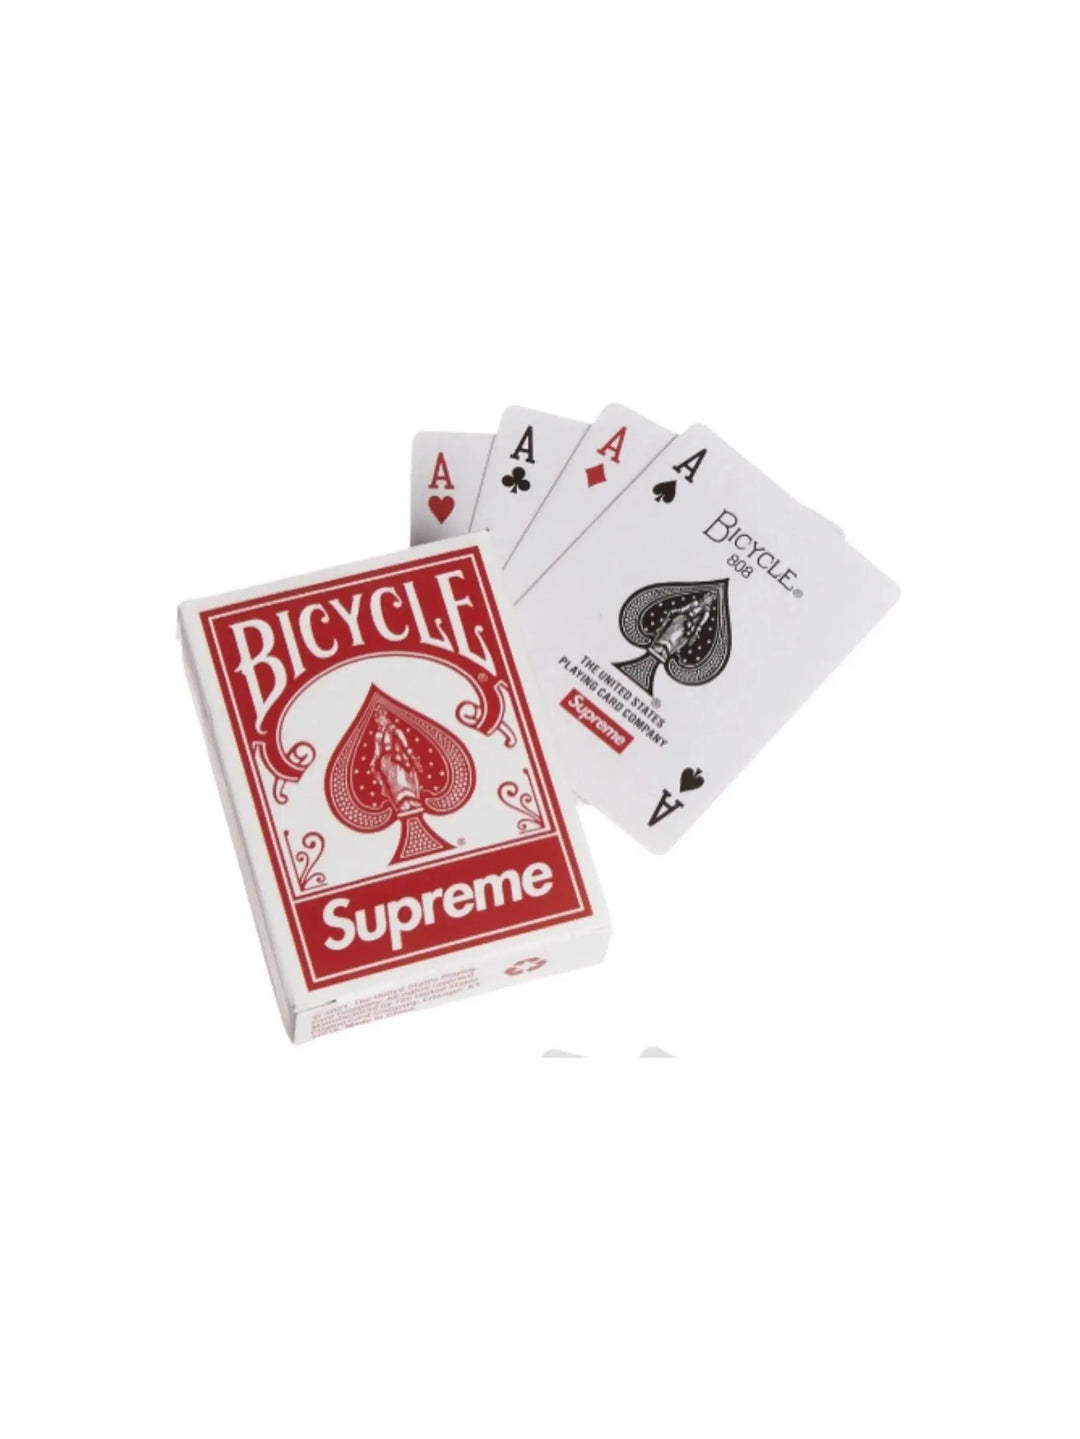 Supreme x Bicycle Mini Playing Card Deck in Melbourne, Australia - Prior